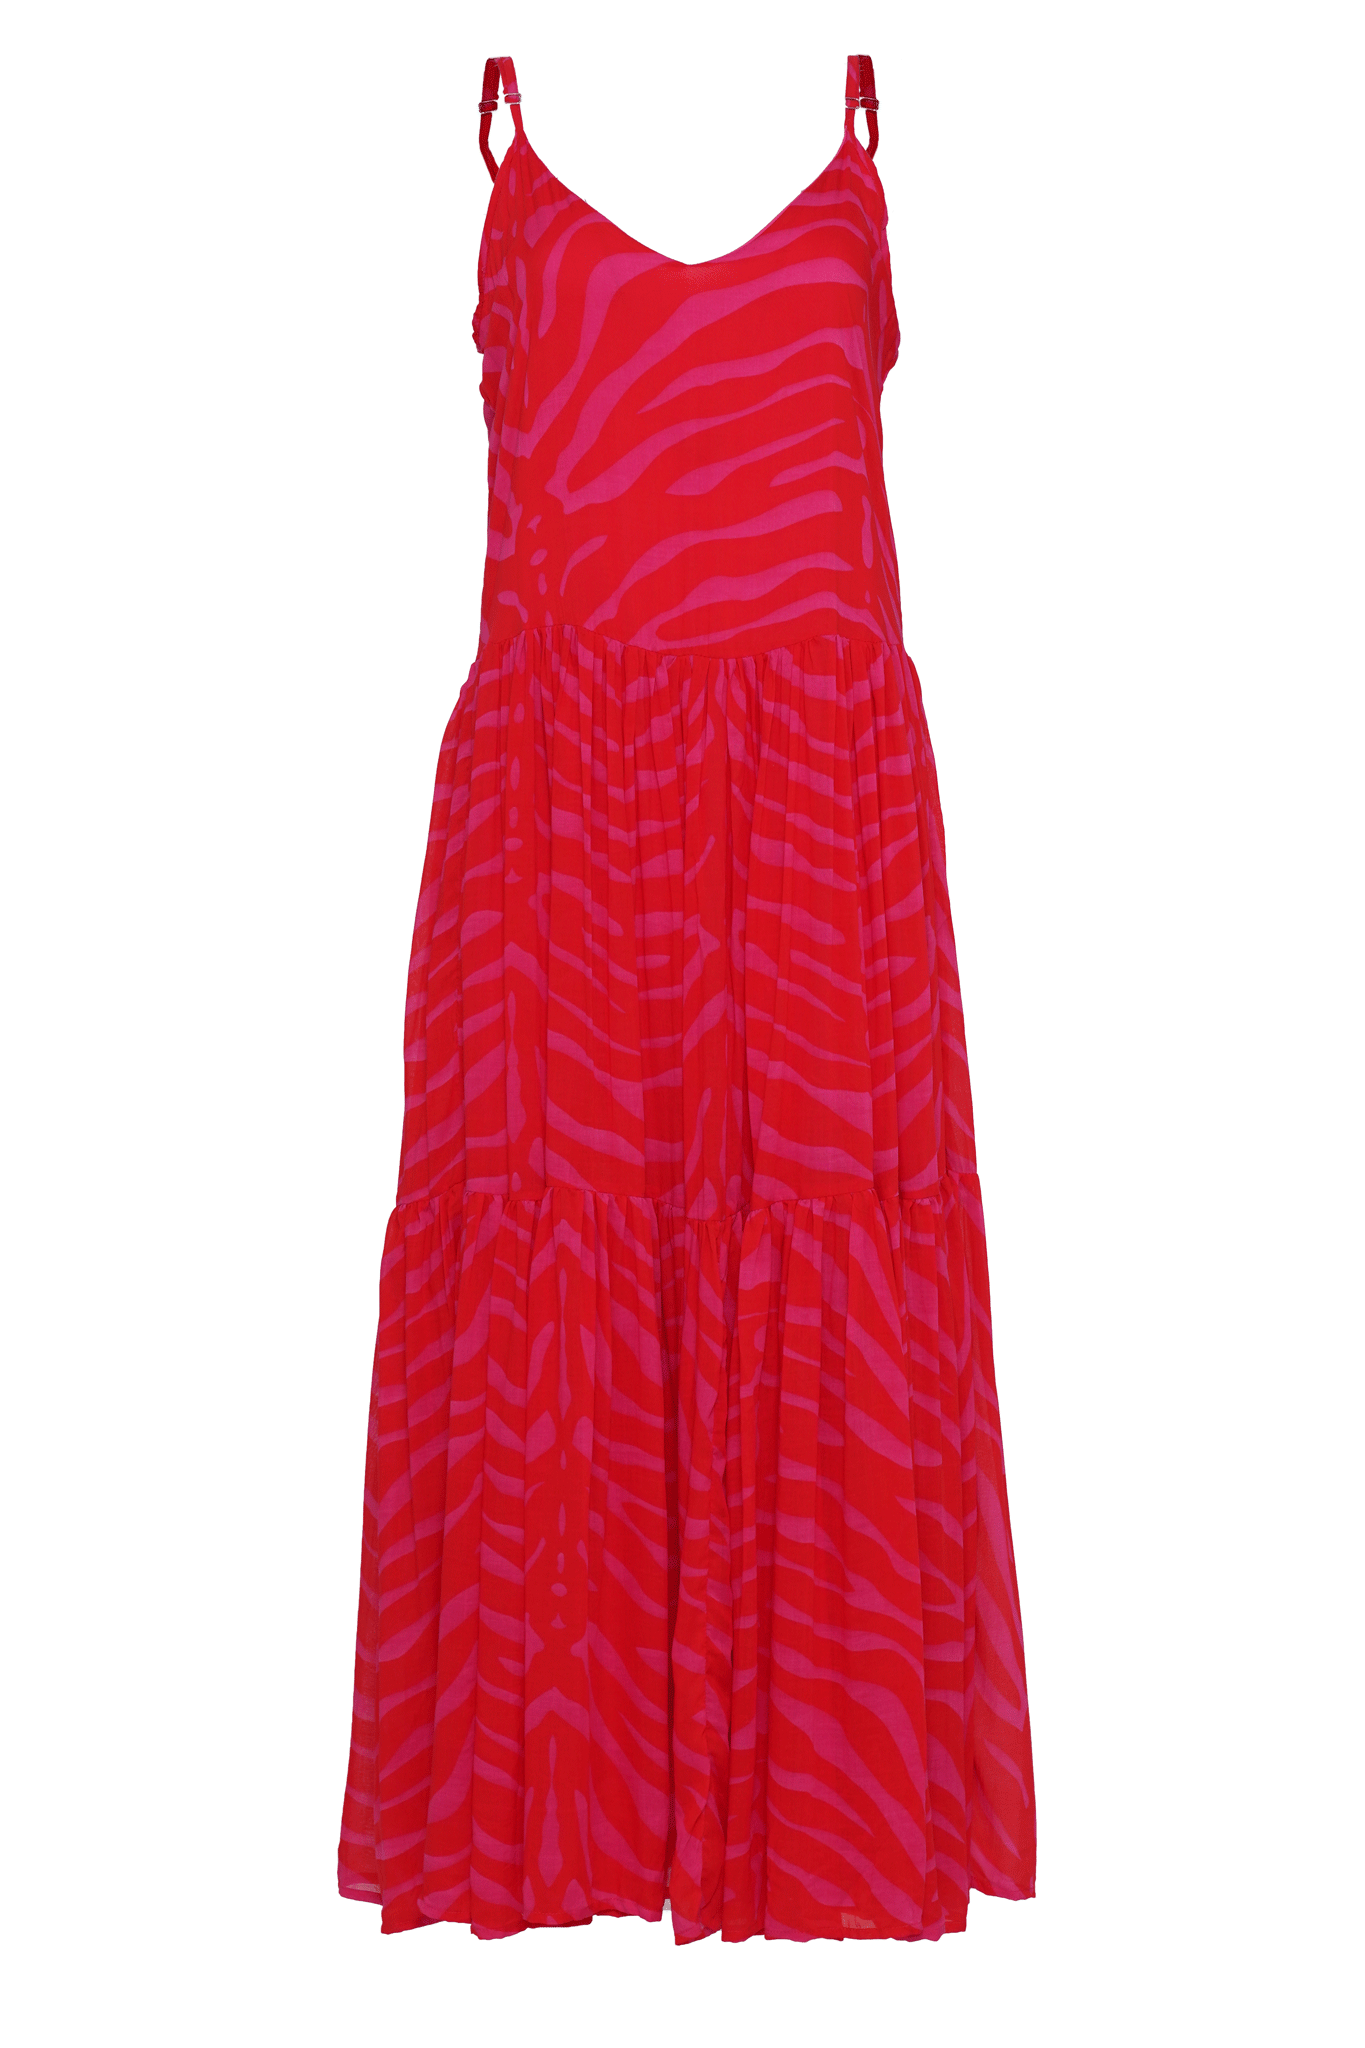 Red and pink zebra stripe summer dress with double tiered skirt and thin adjustable straps